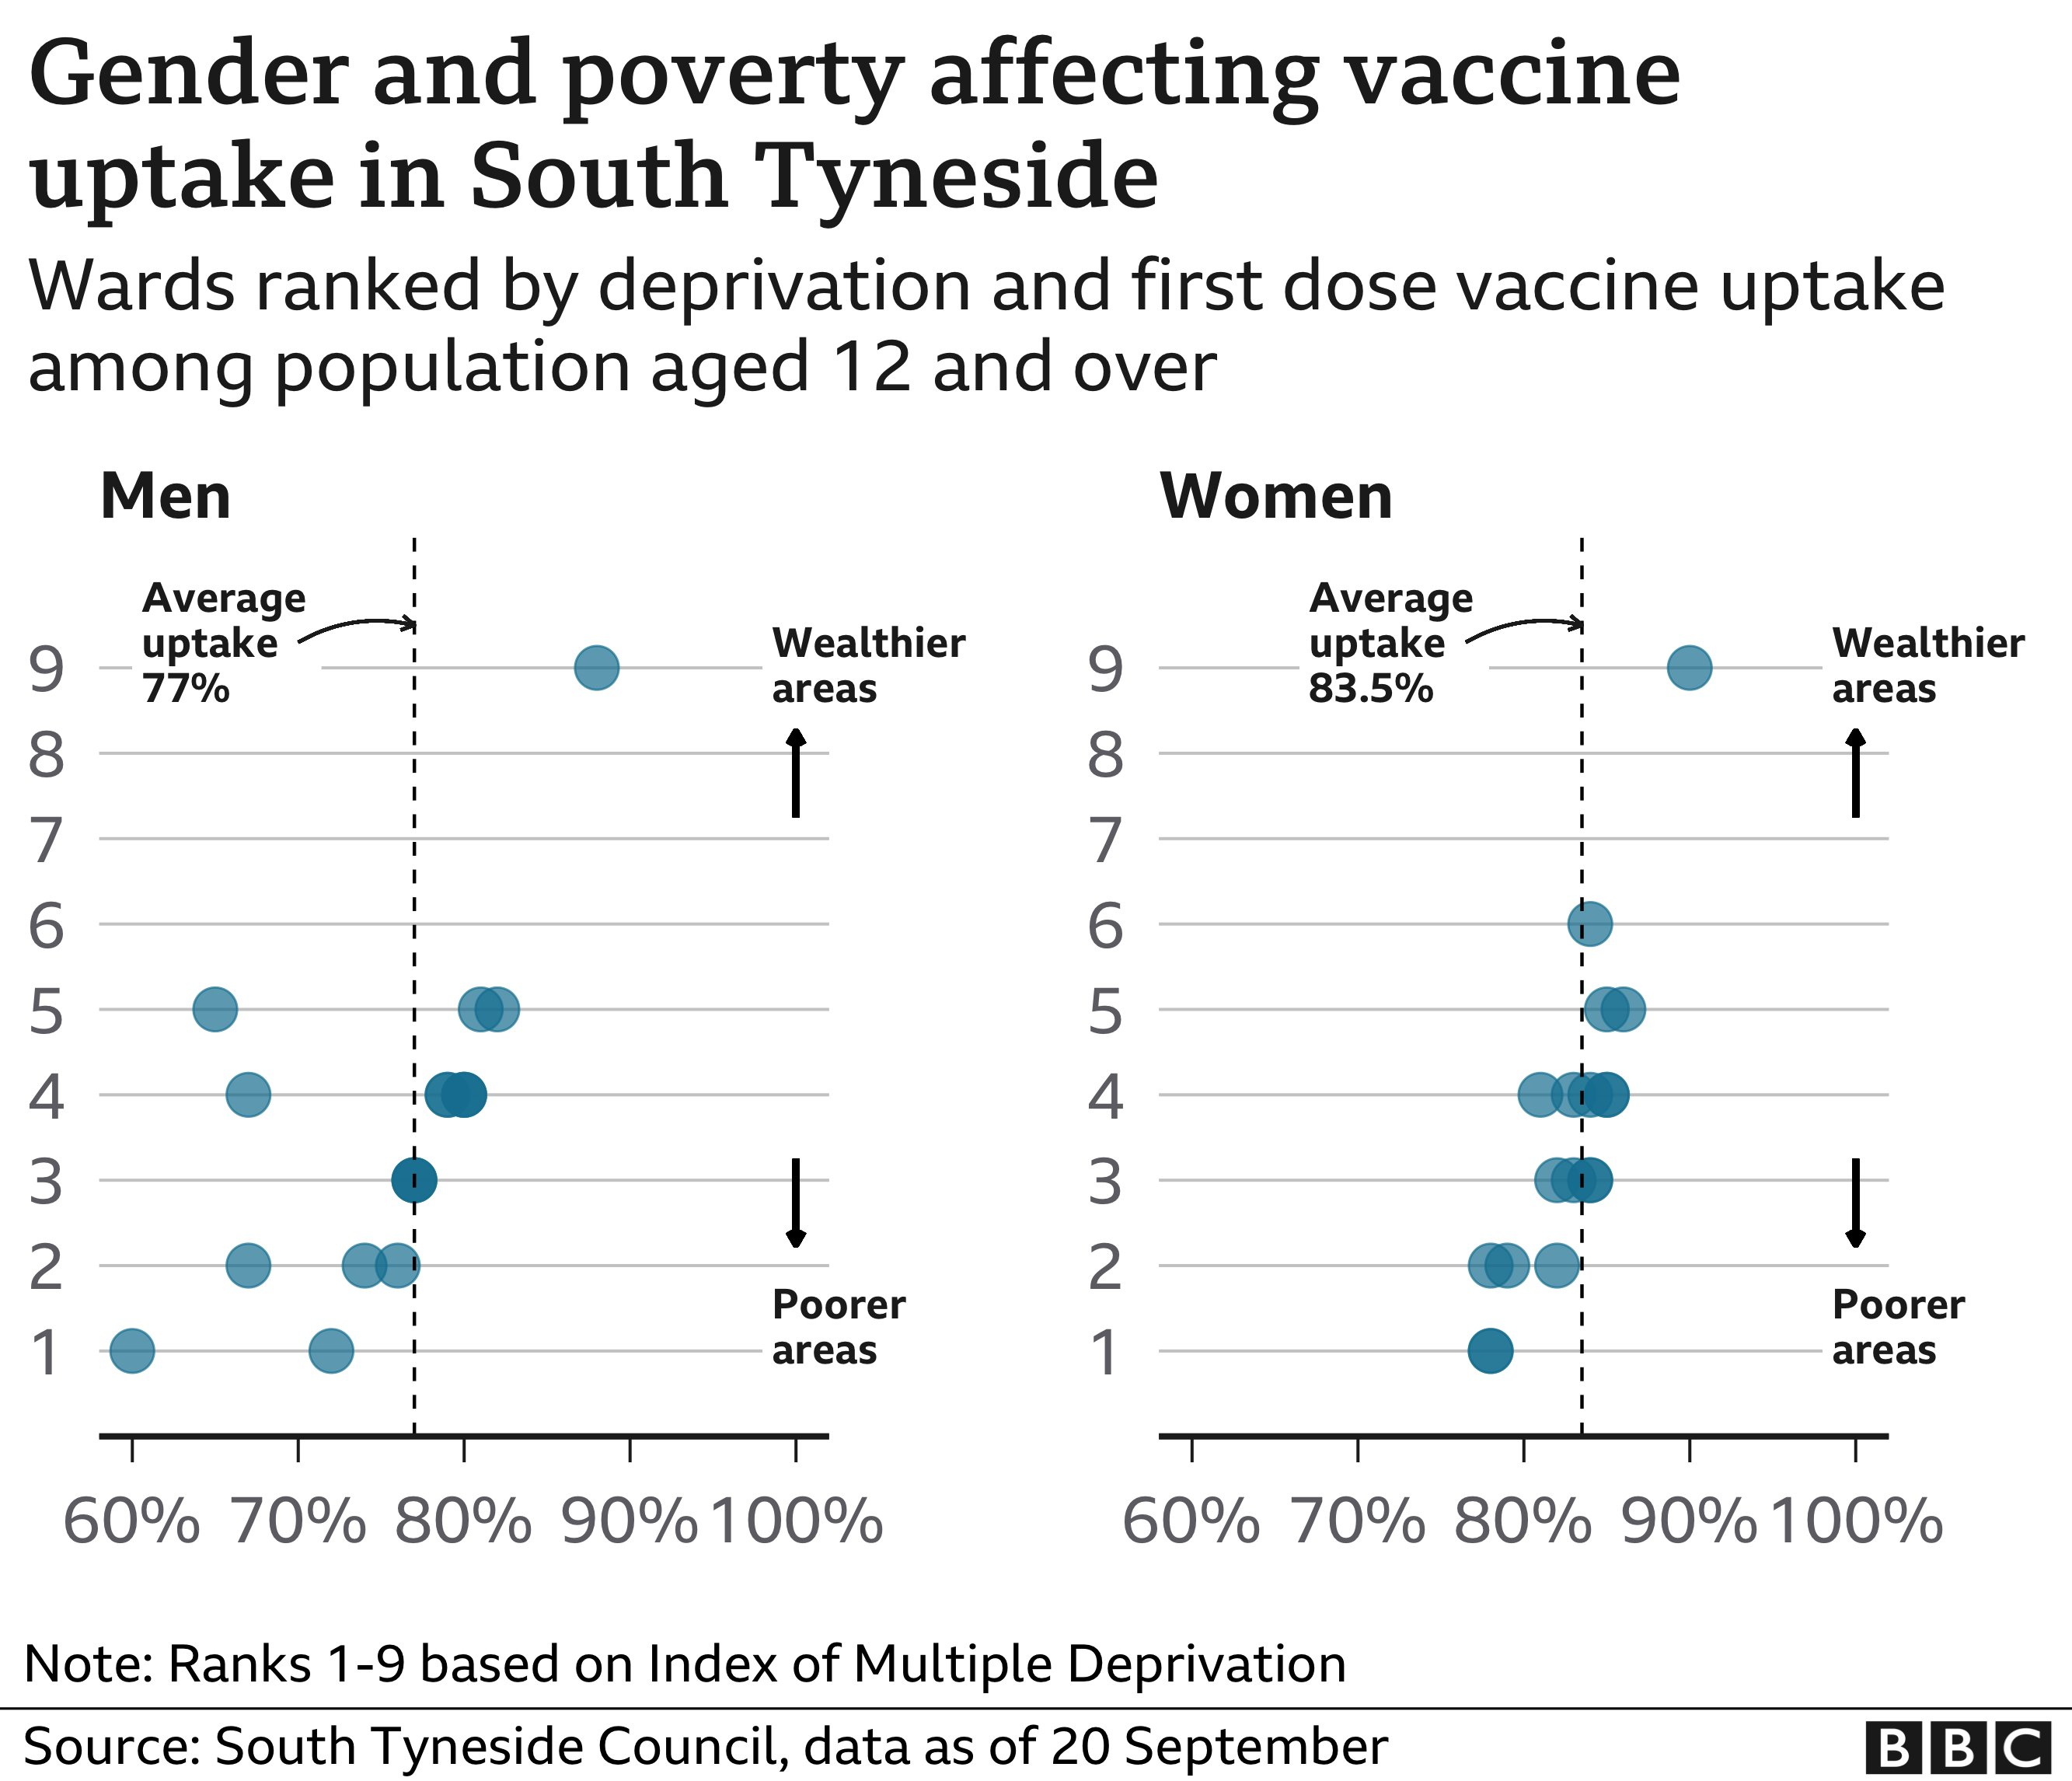 Graphic showing how gender and poverty has affected vaccine take-up in South Tyneside